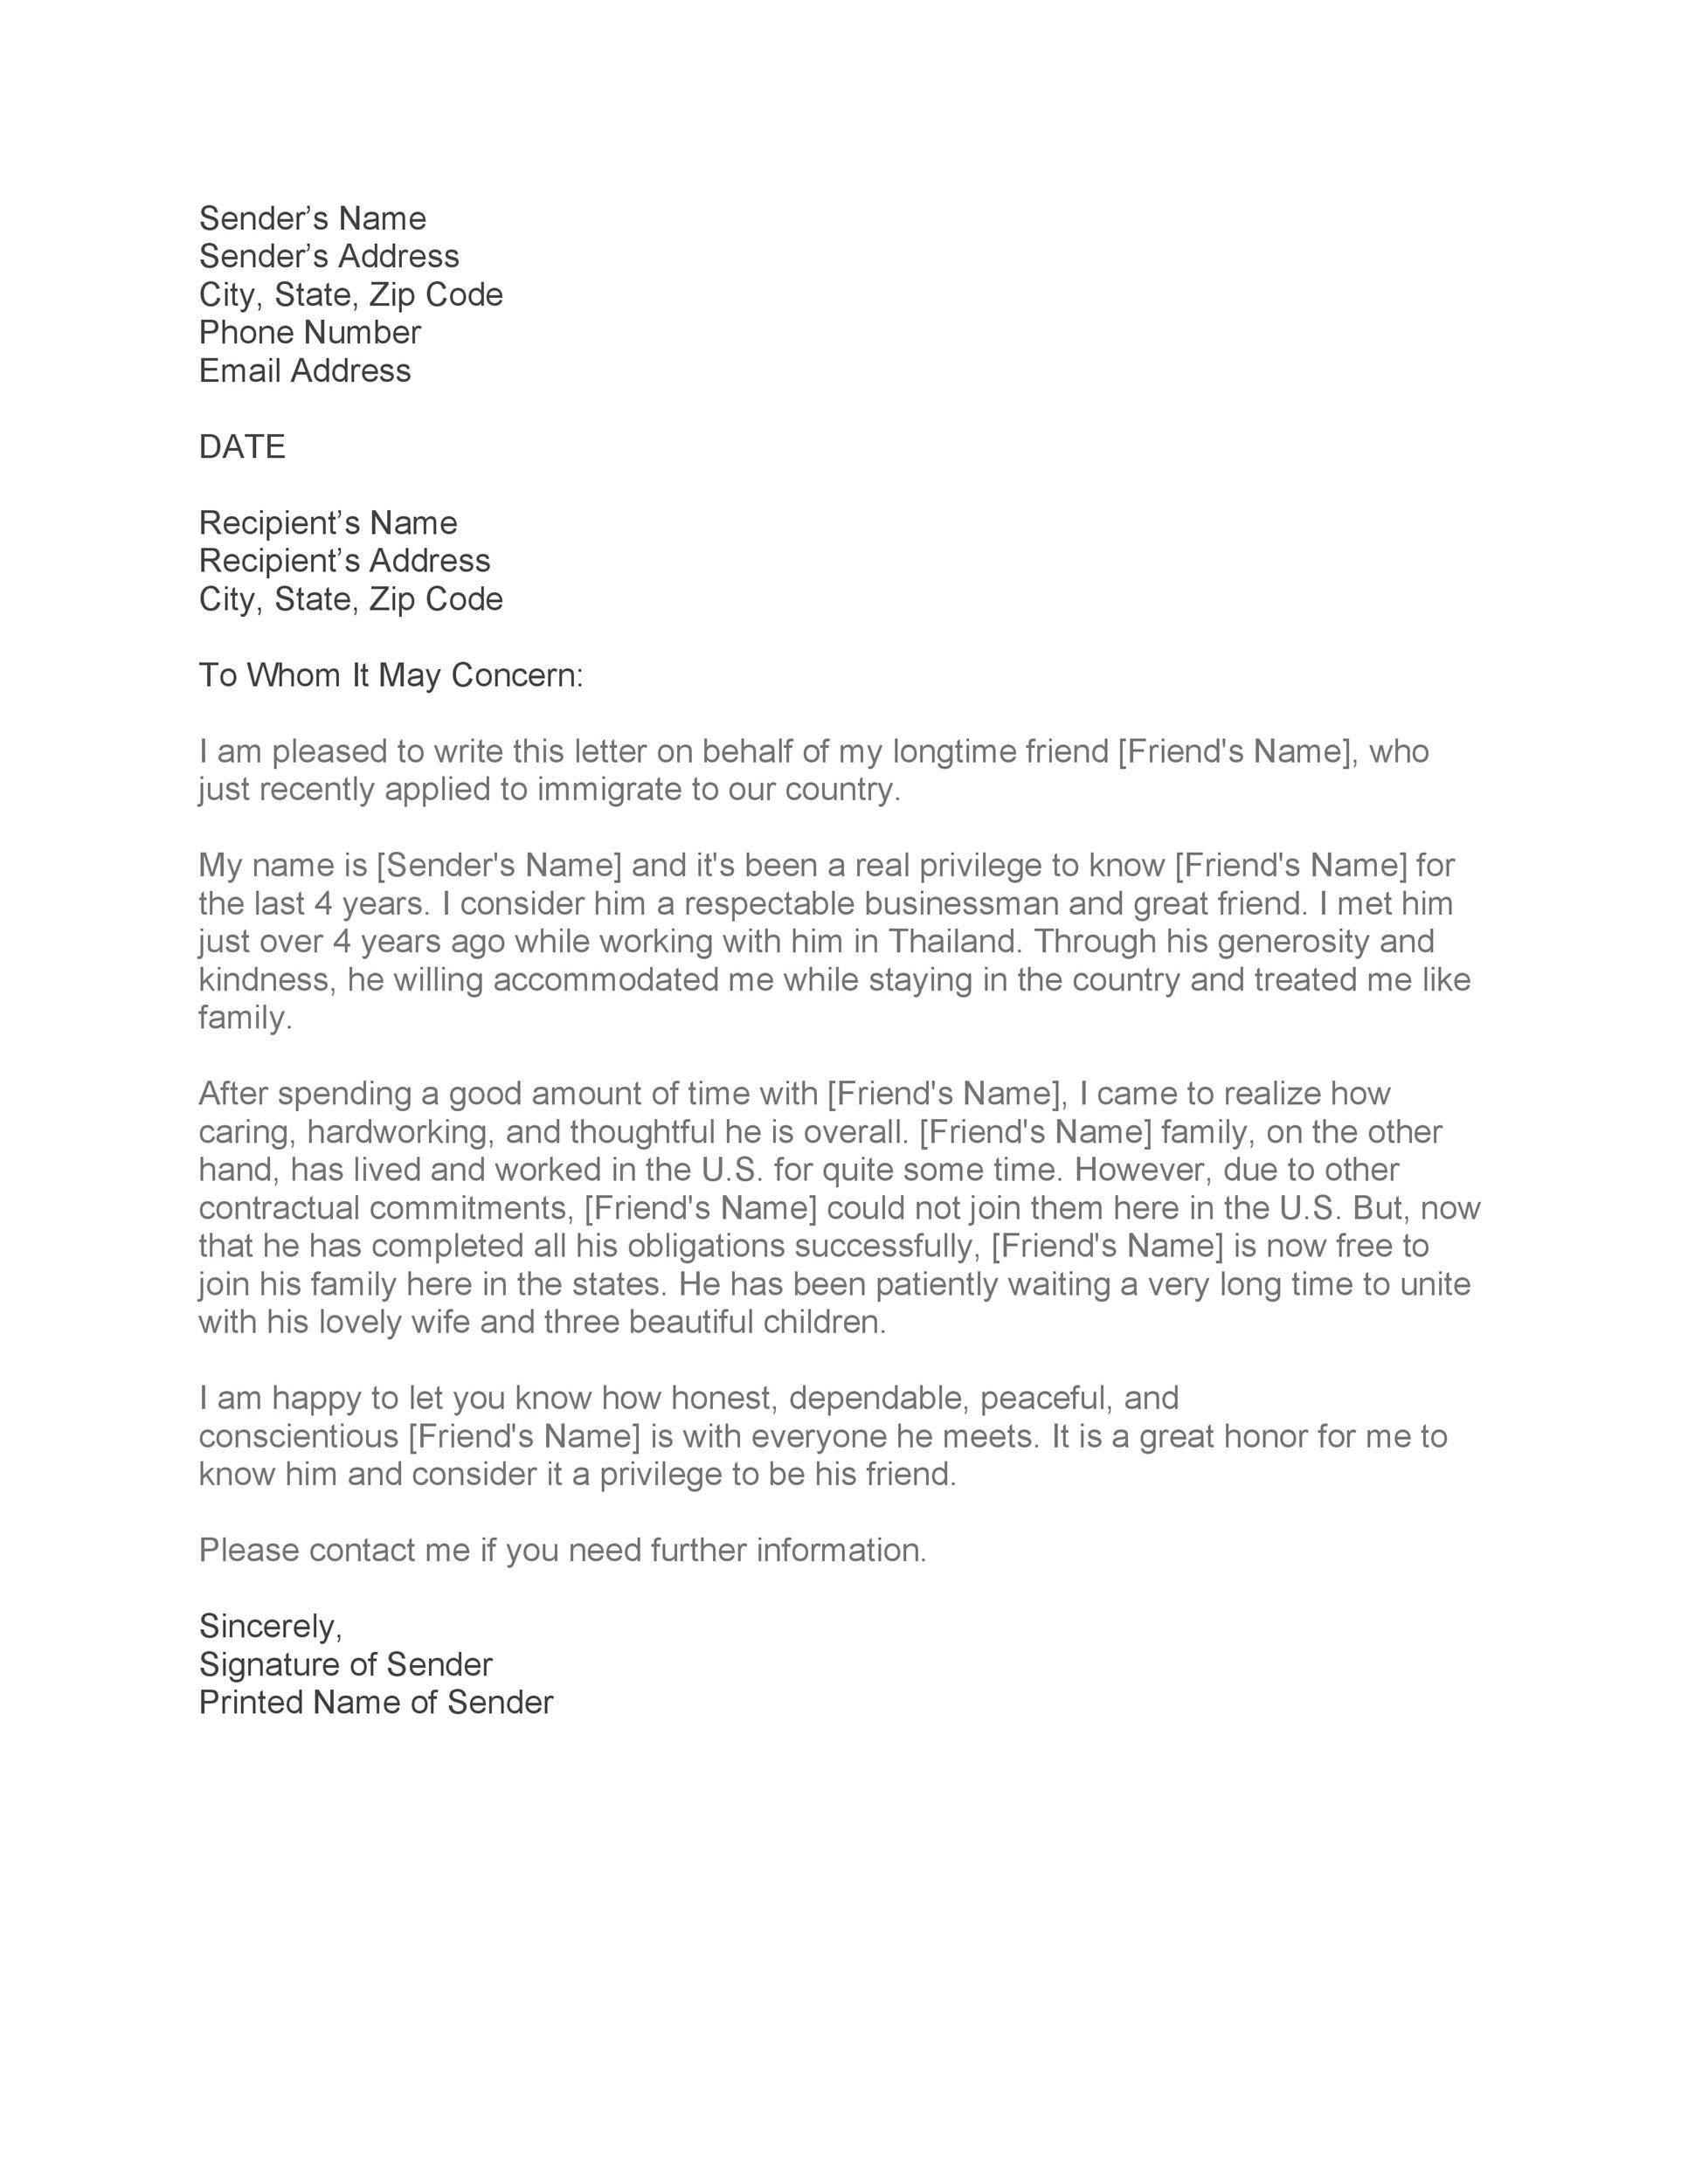 Letter Of Recommendation Immigration from templatelab.com